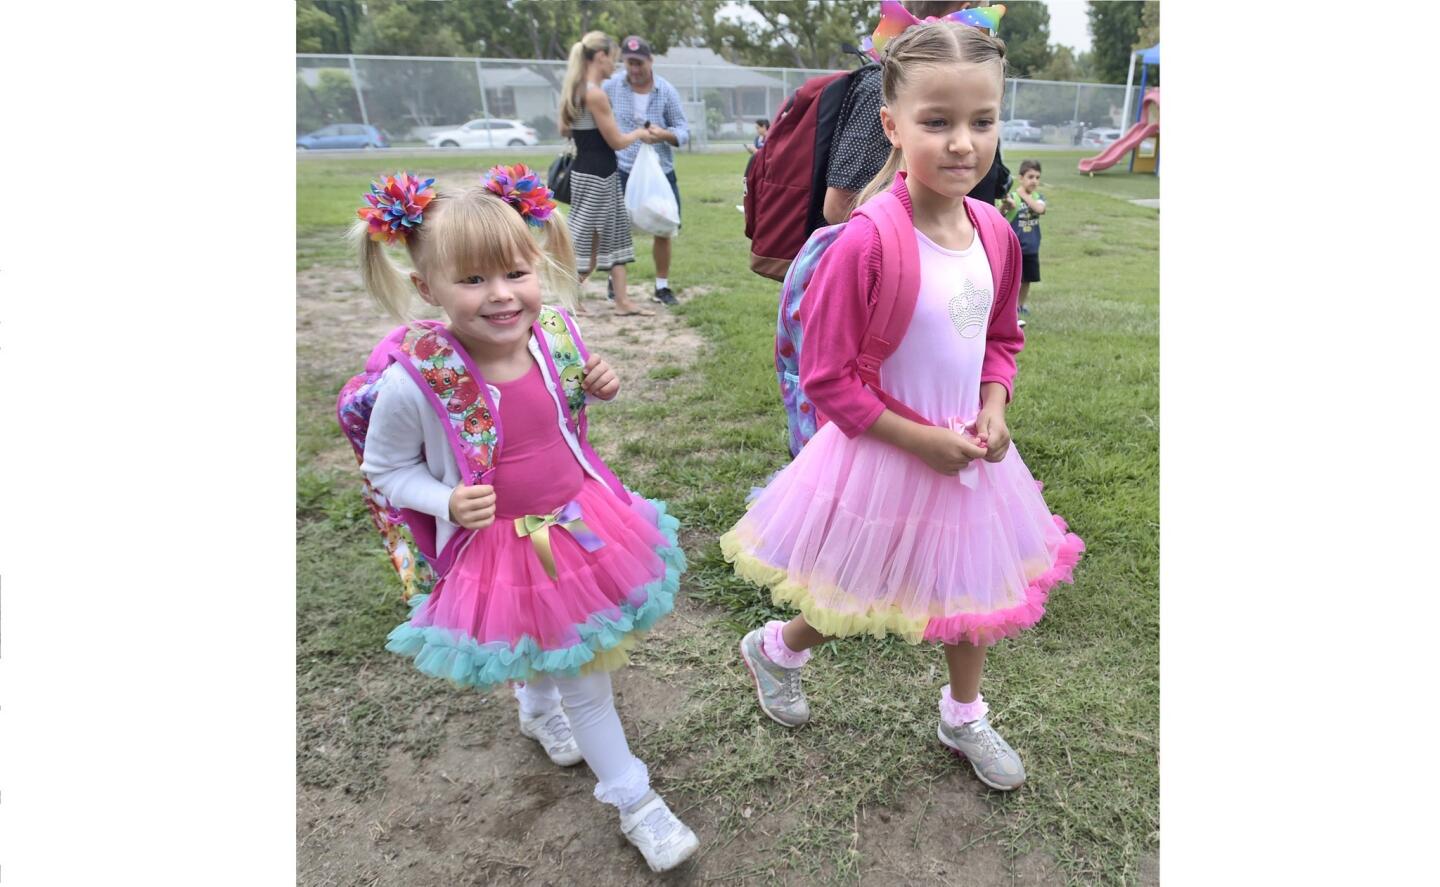 Olivia, left, and Chloe Rogerson, who are sisters, head for their classrooms at Thomas Jefferson Elementary School. (photo by Dan Watson)